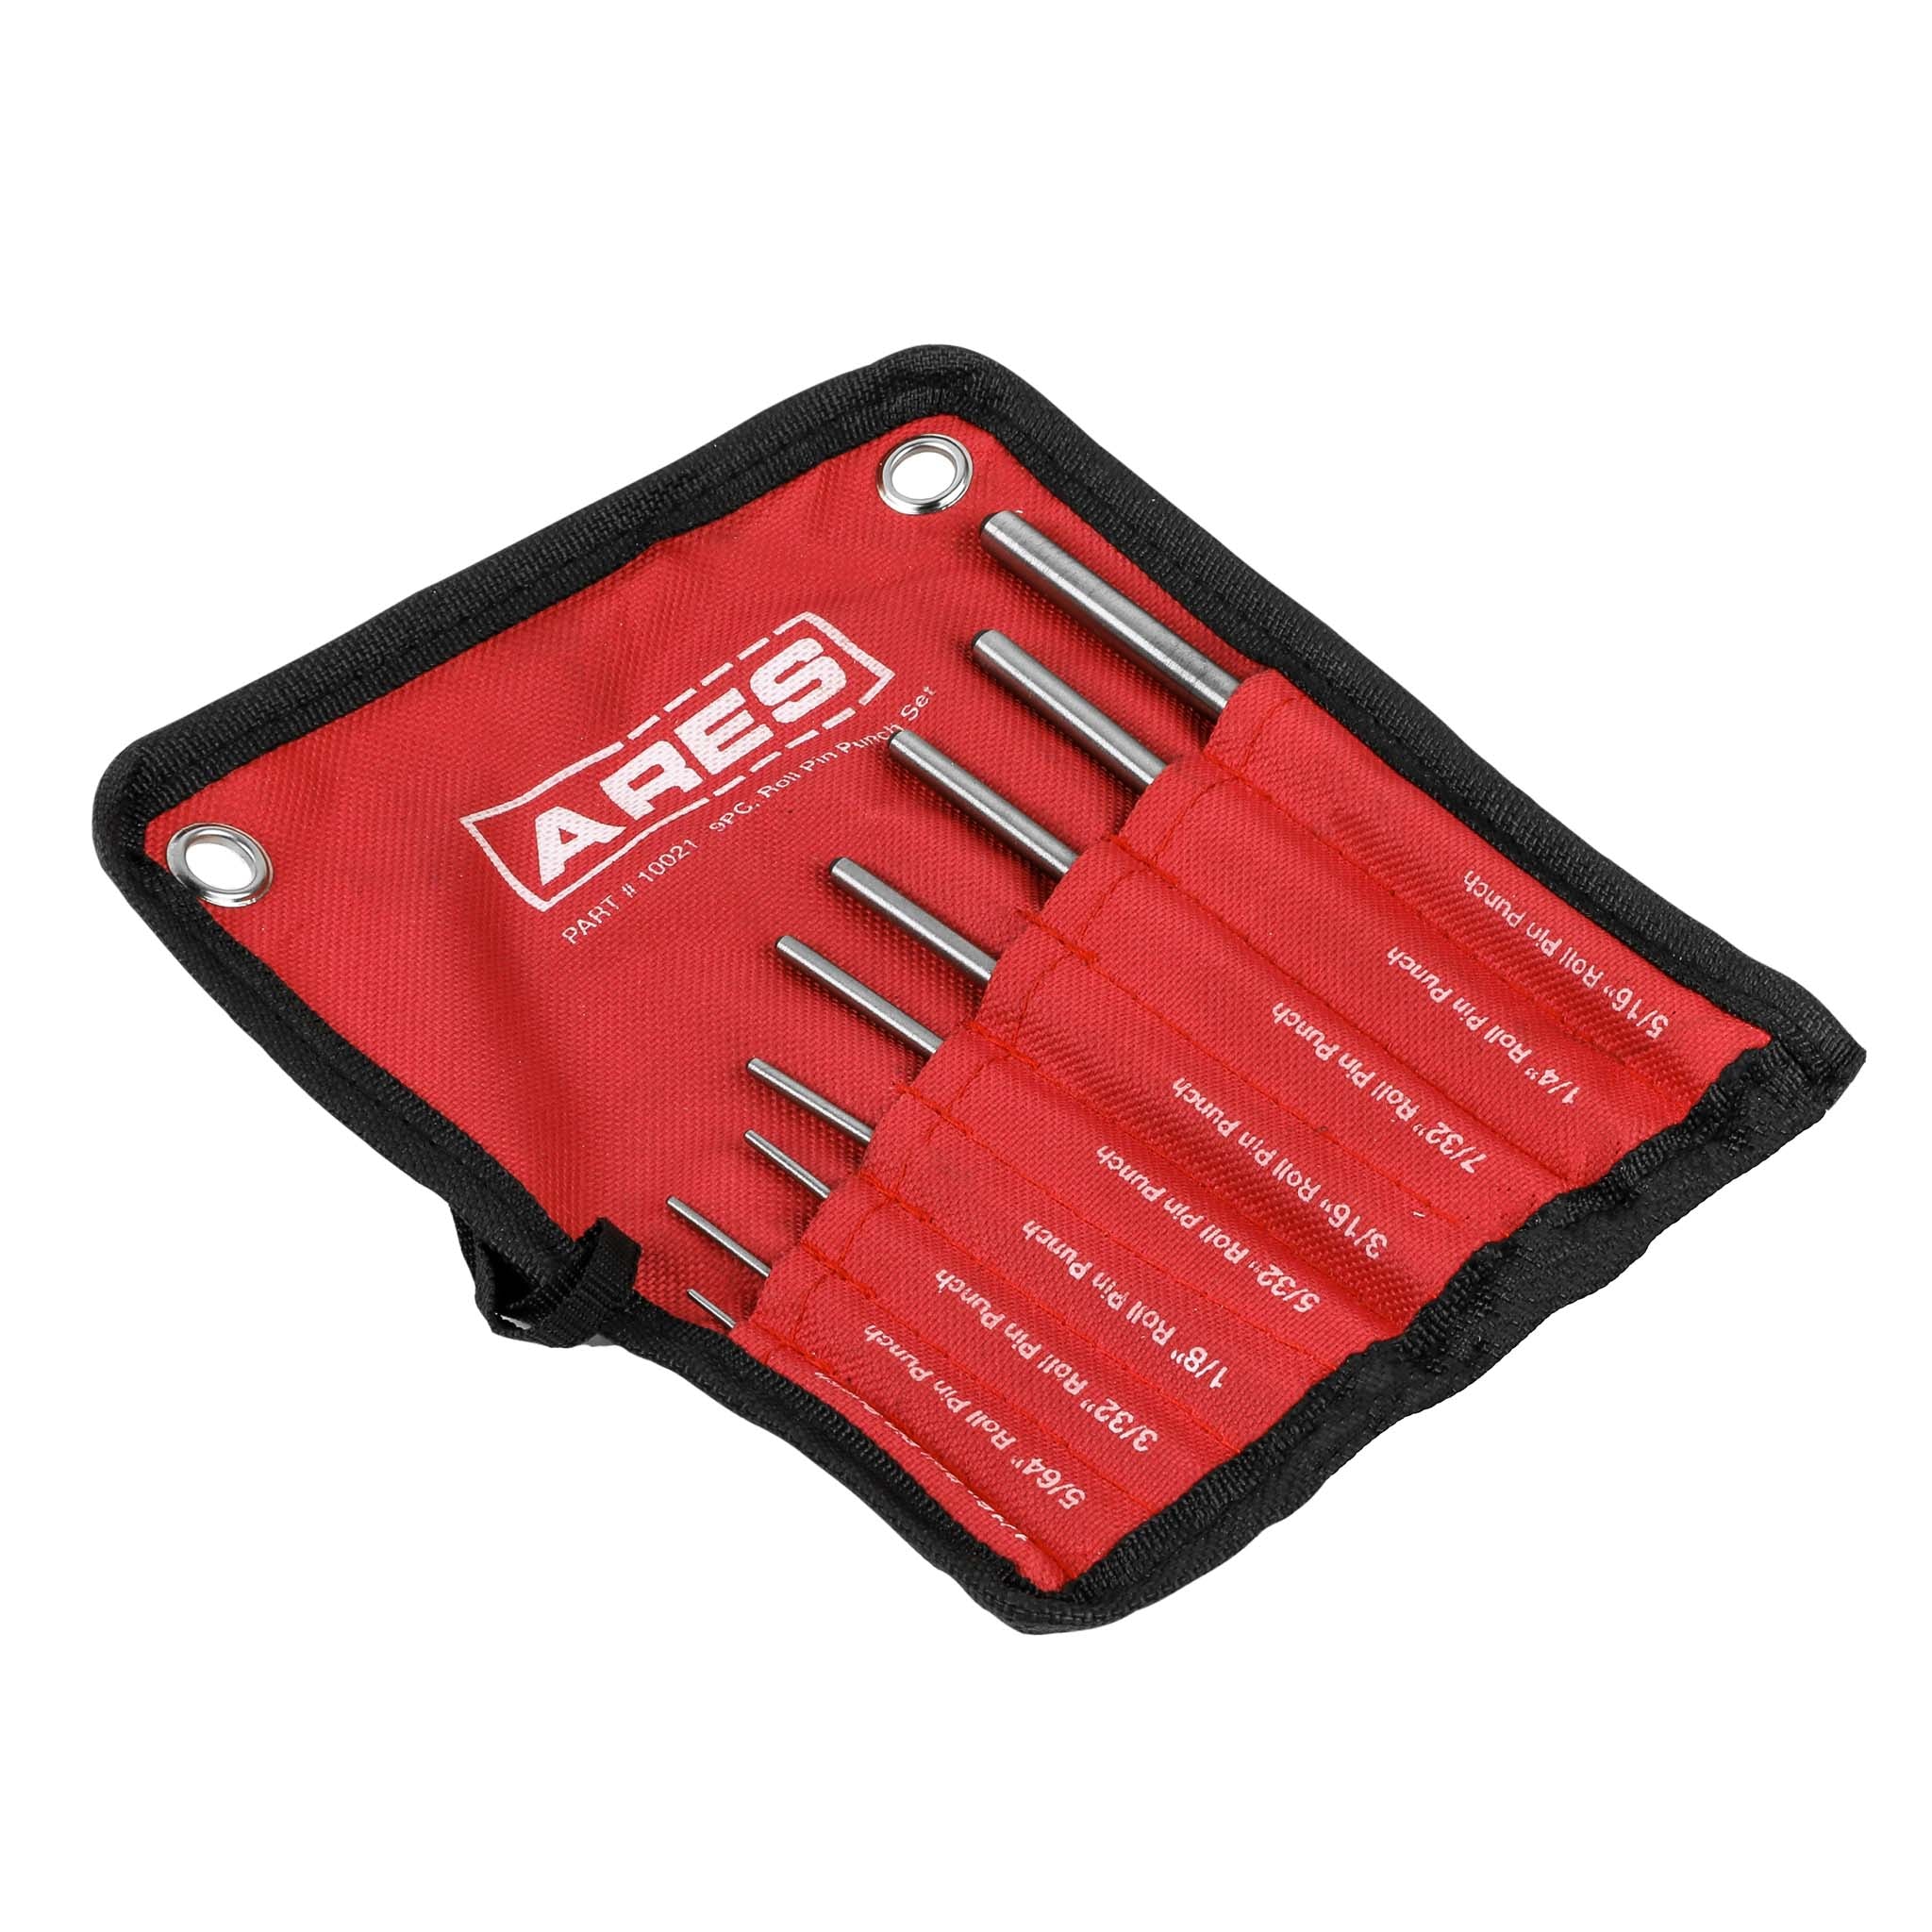 9-Piece Roll Pin Punch Set – ARES Tool, MJD Industries, LLC